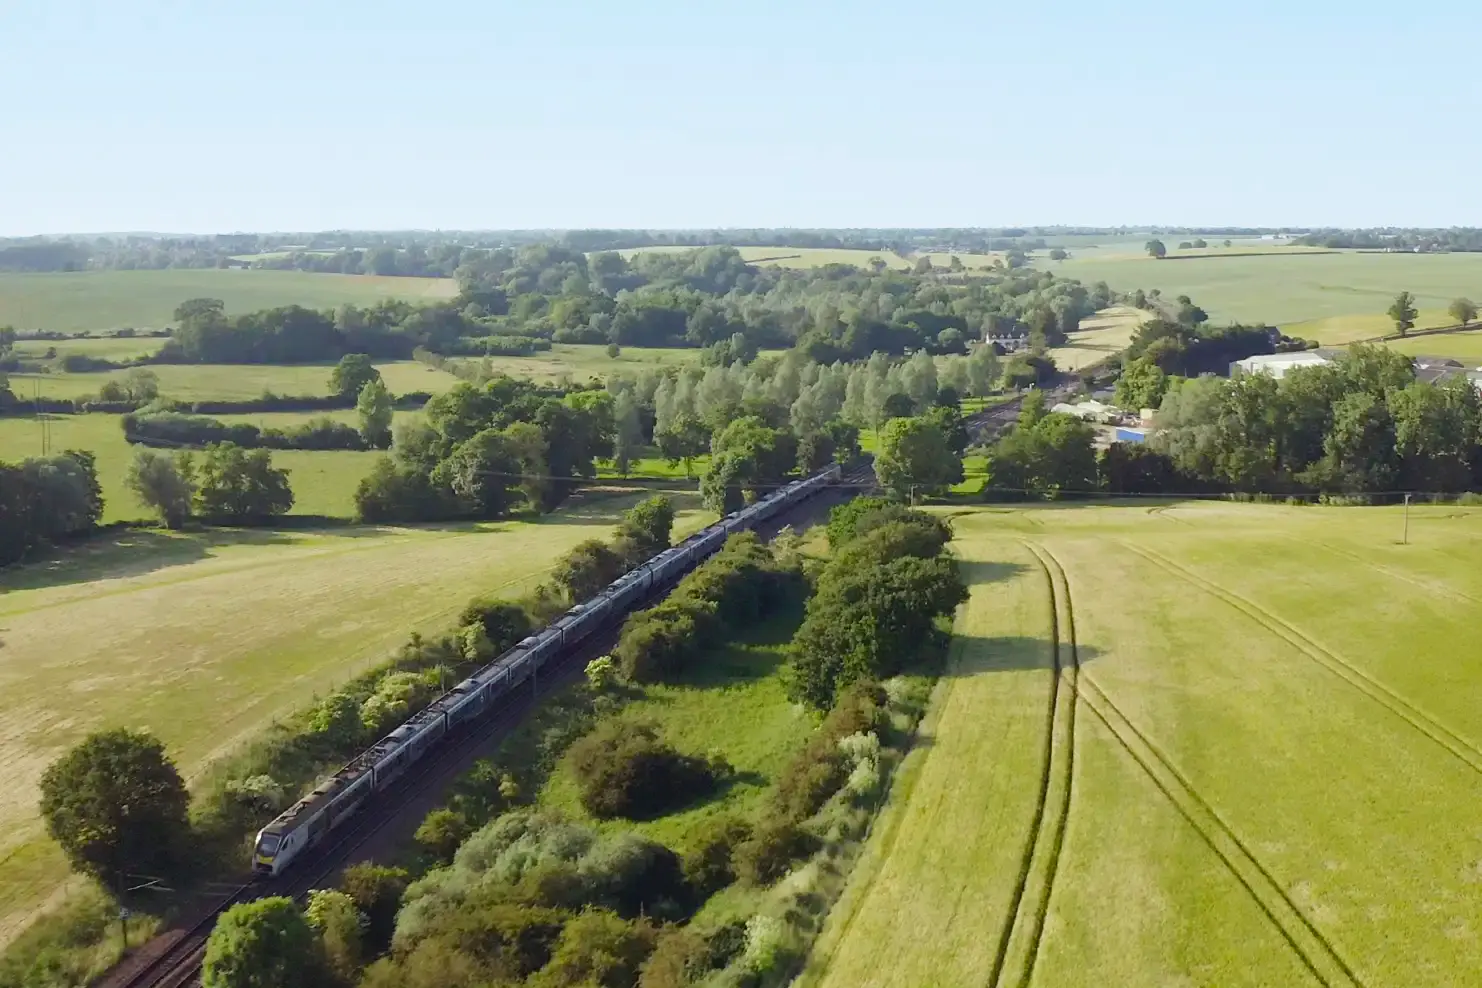 drone perspective of train